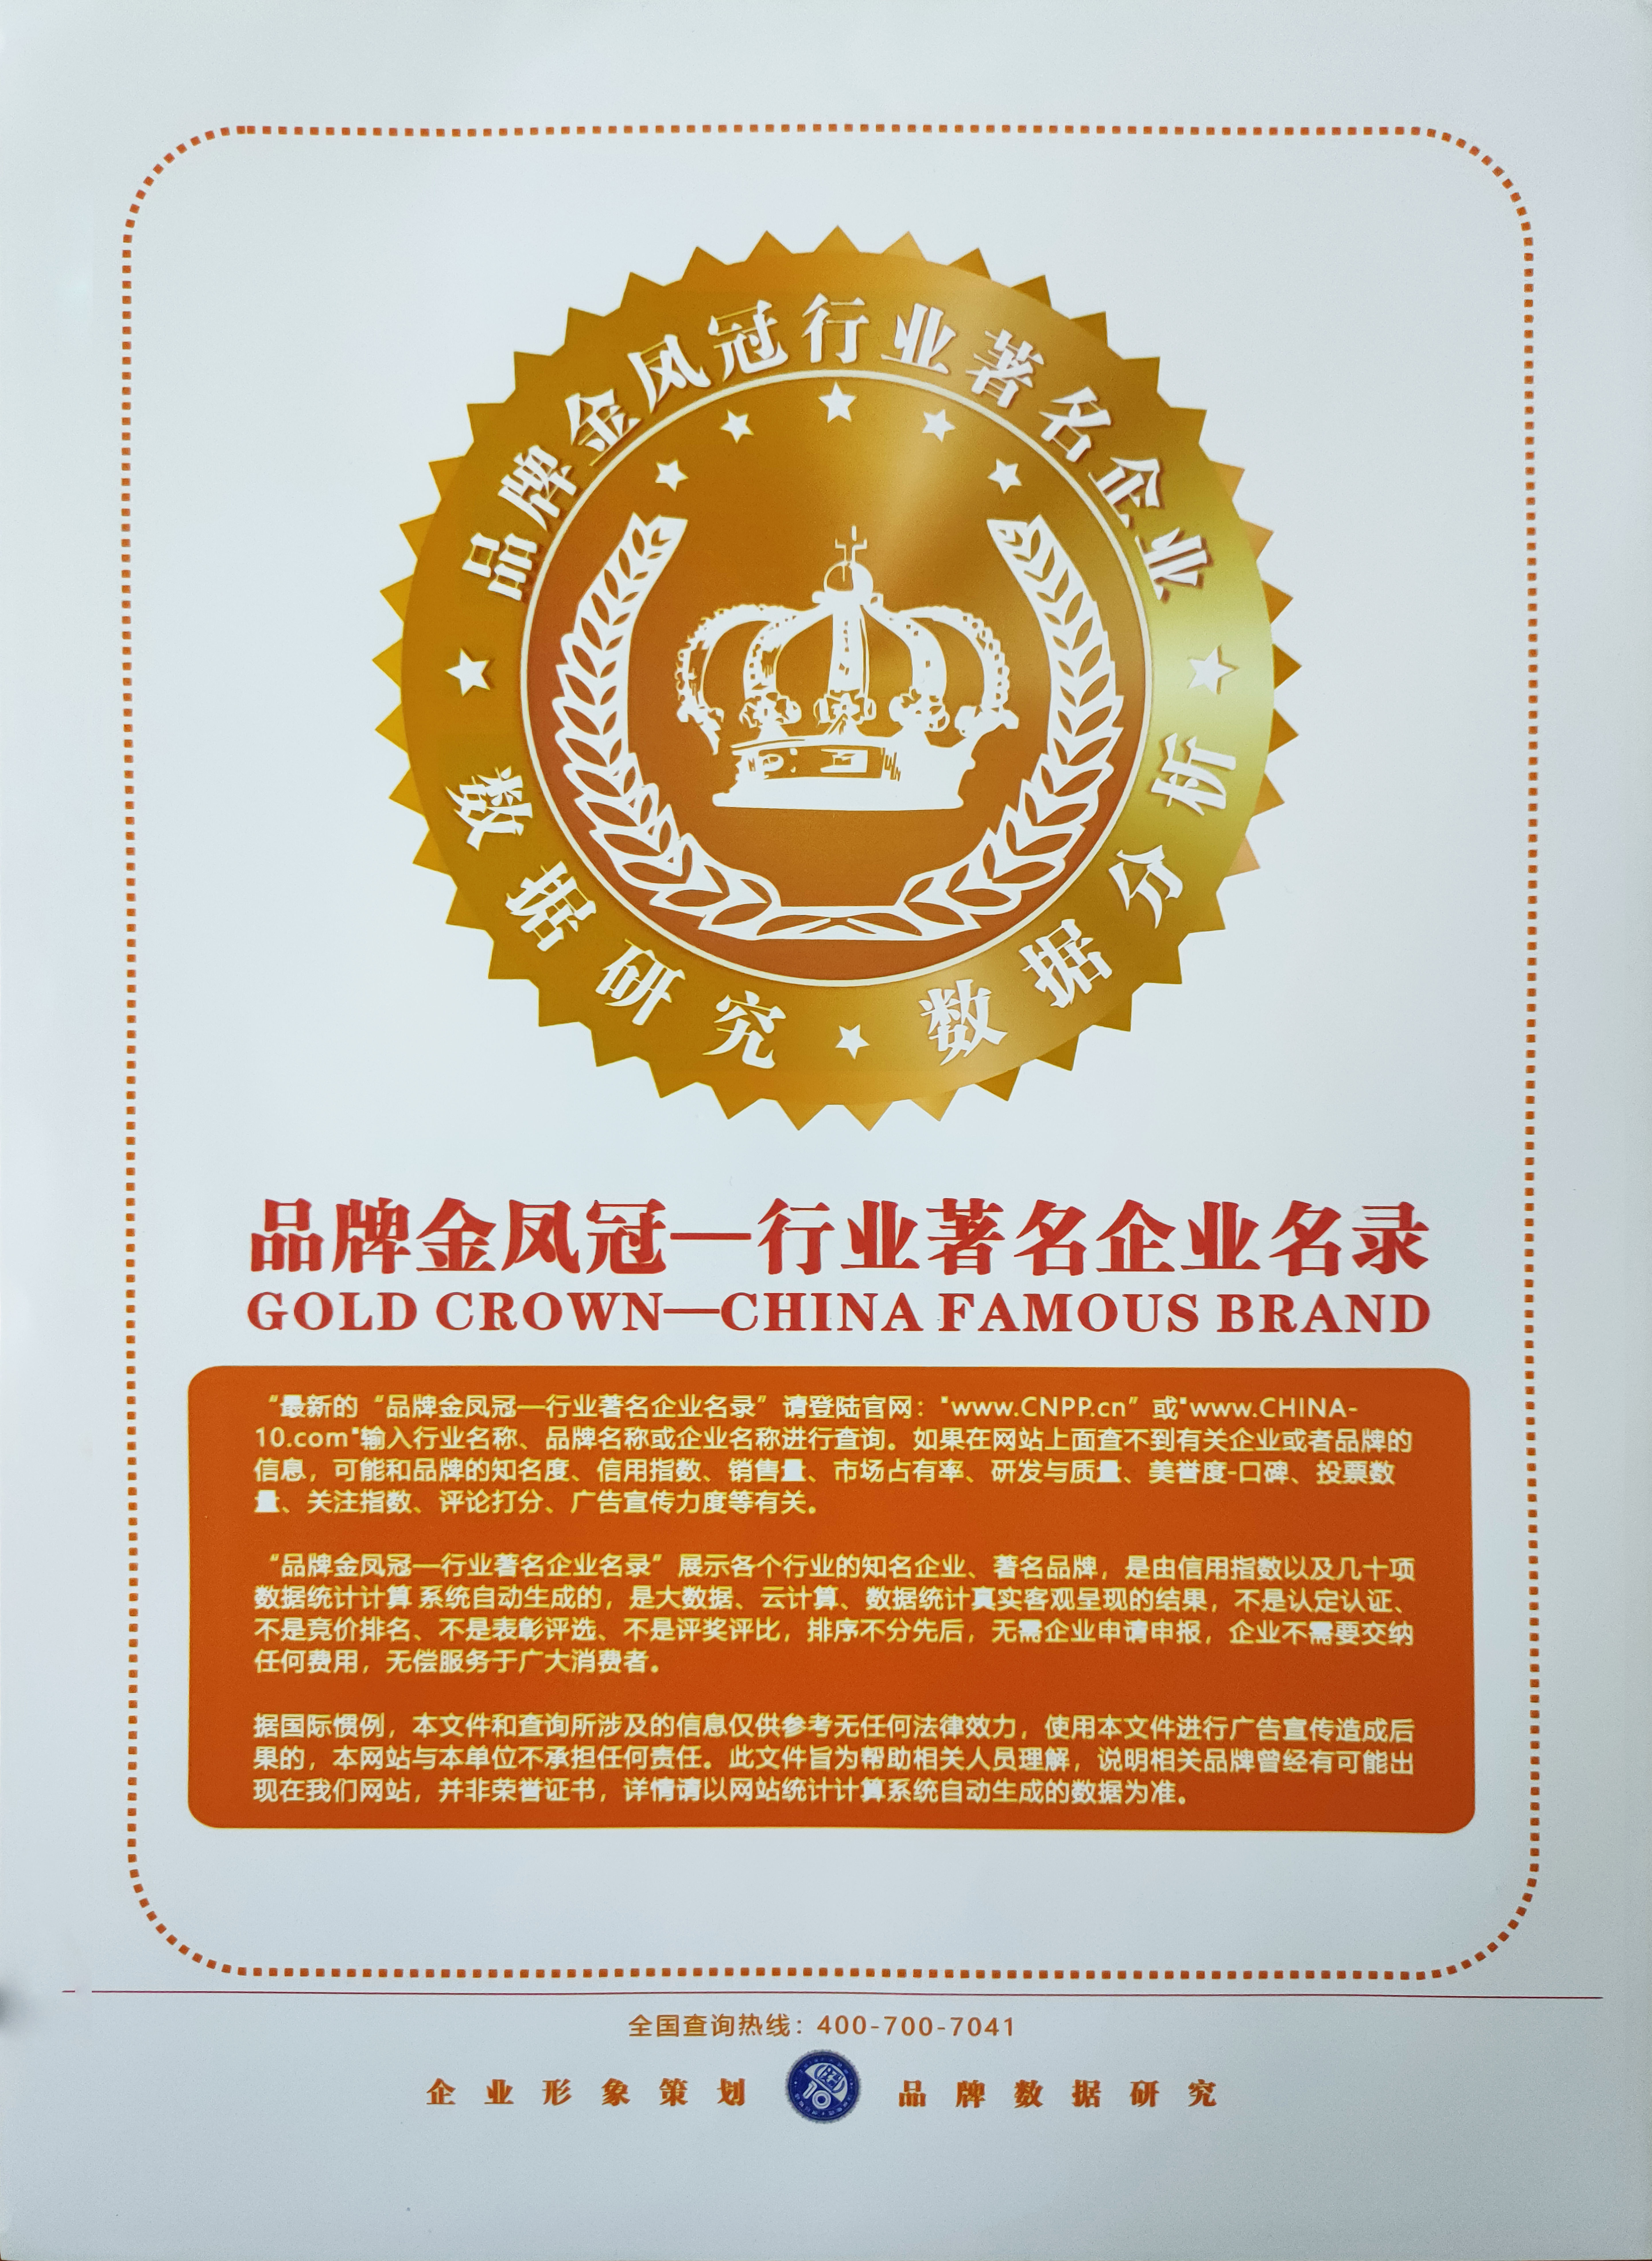 Golden Phoenix crown, a famous brand in the industry